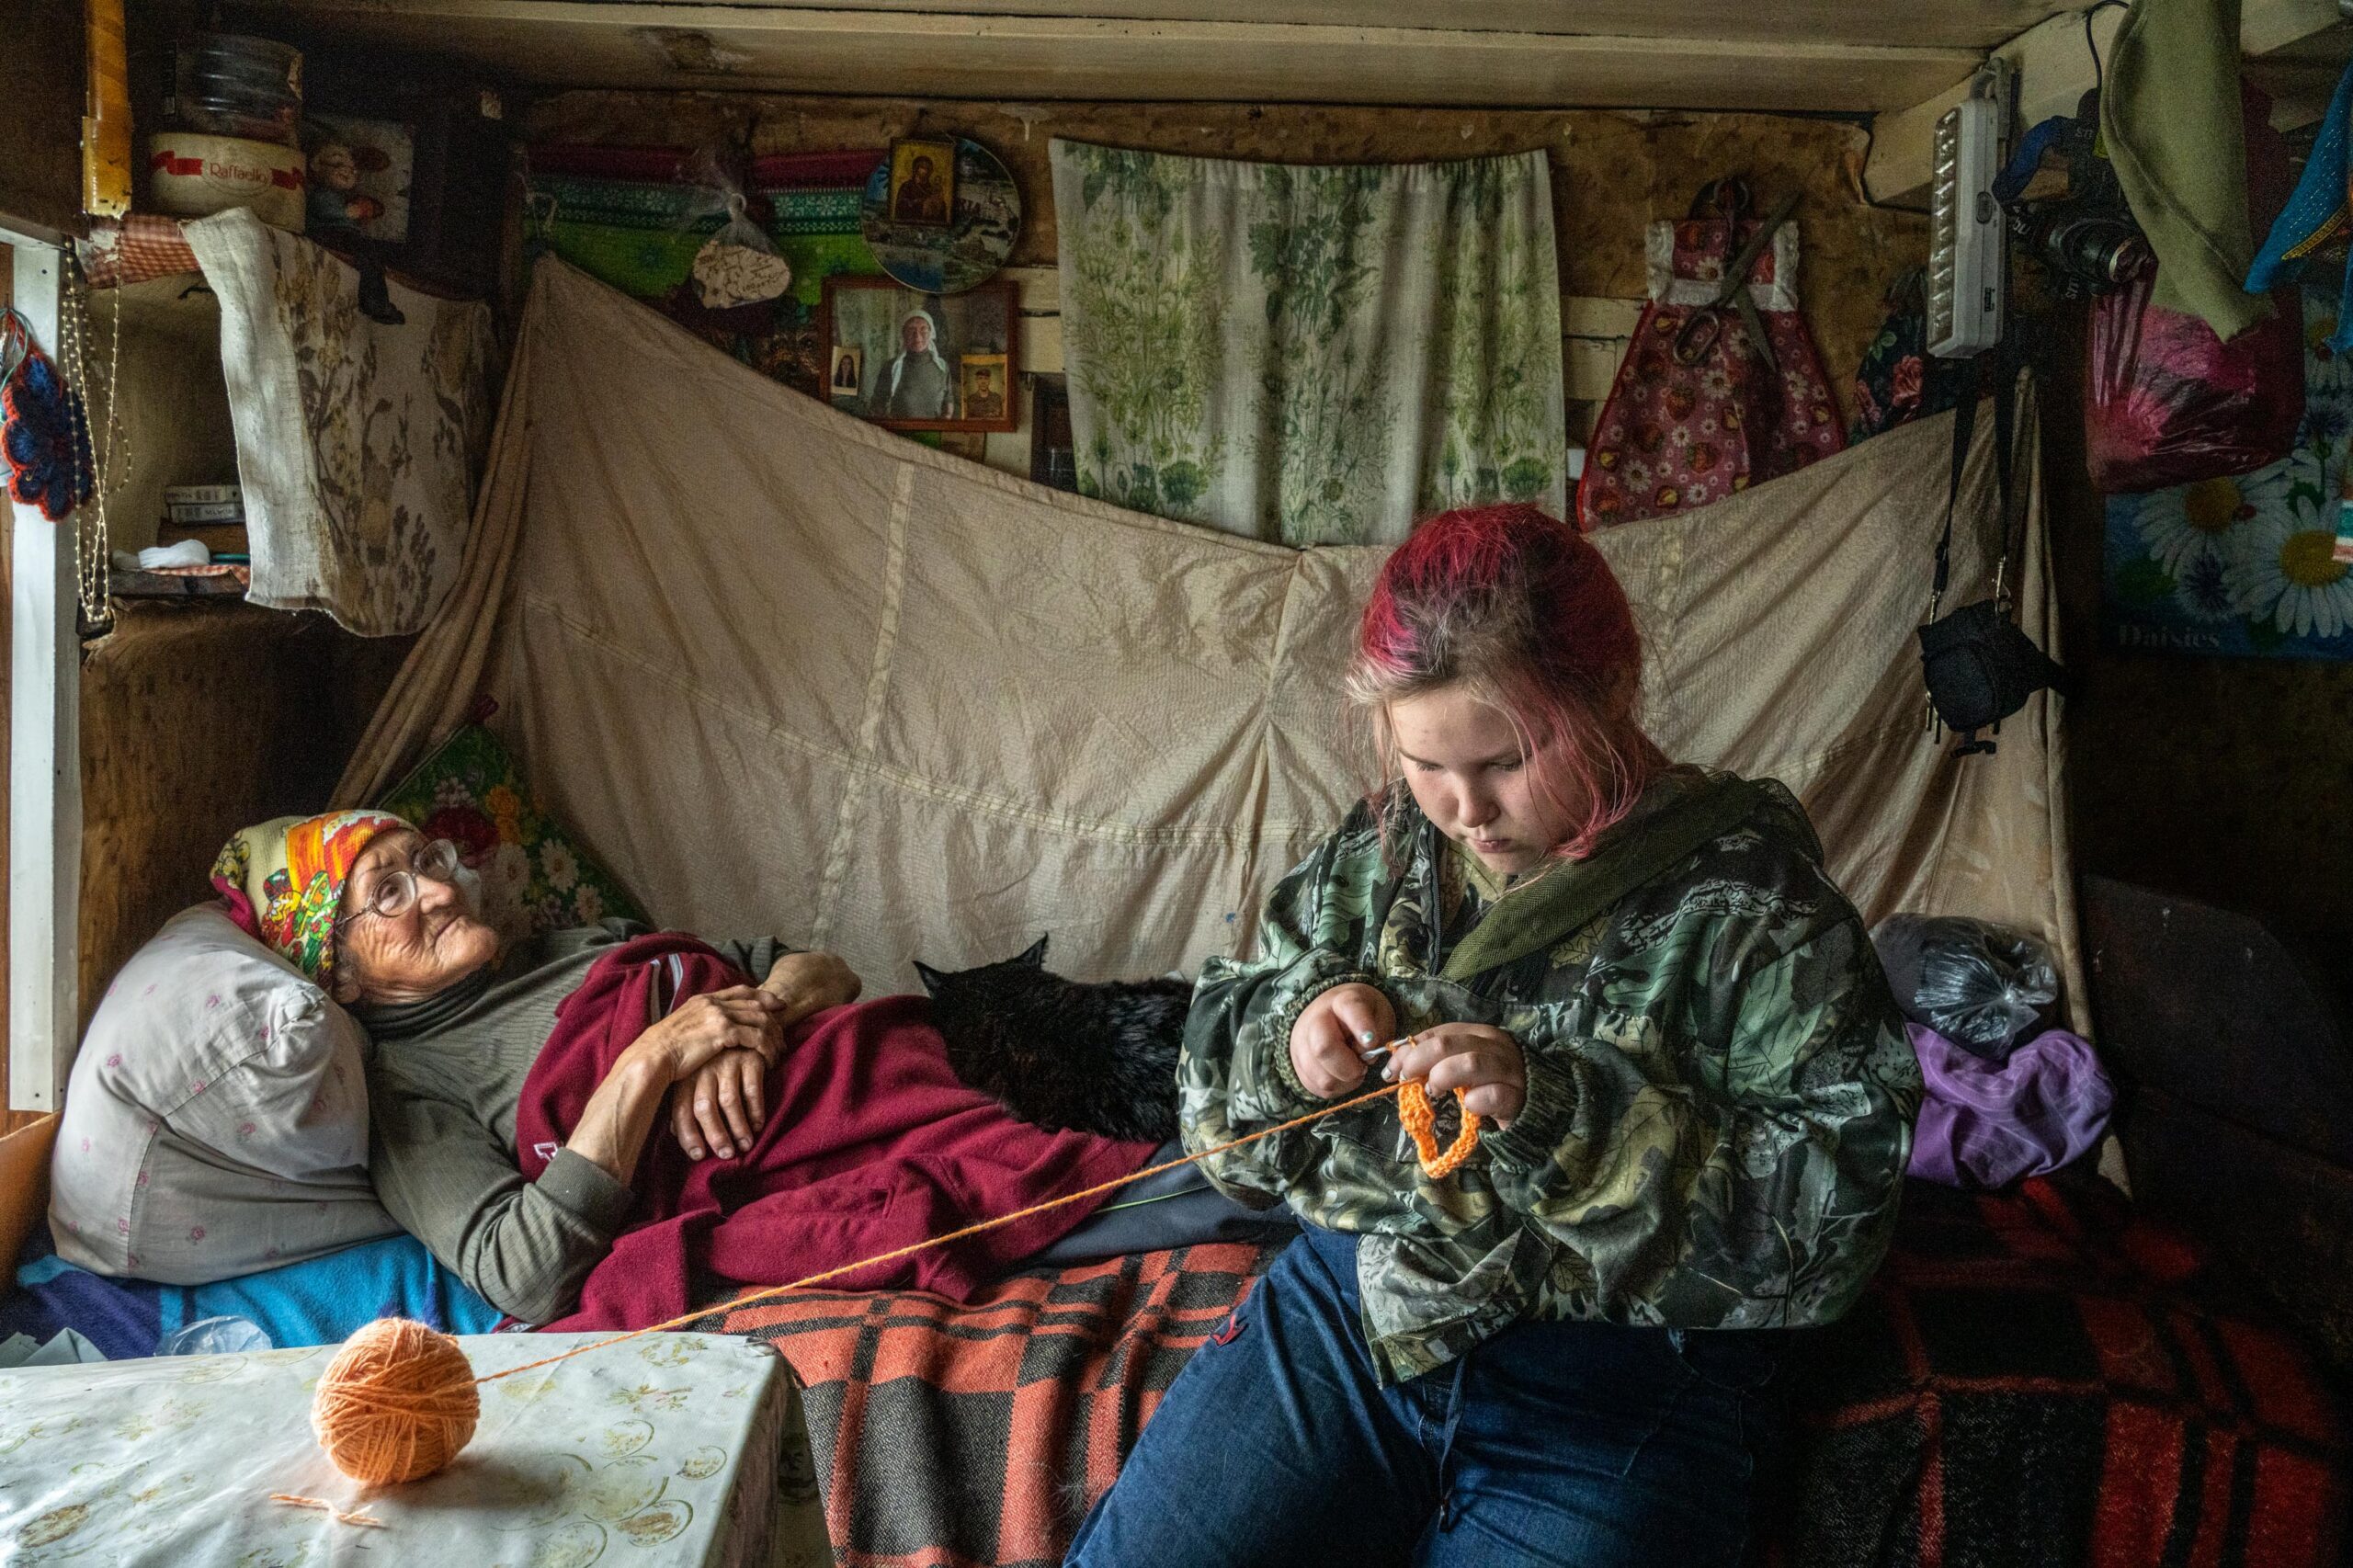 Uliana is knitting a decoration while an older woman lies on a bed behind her.